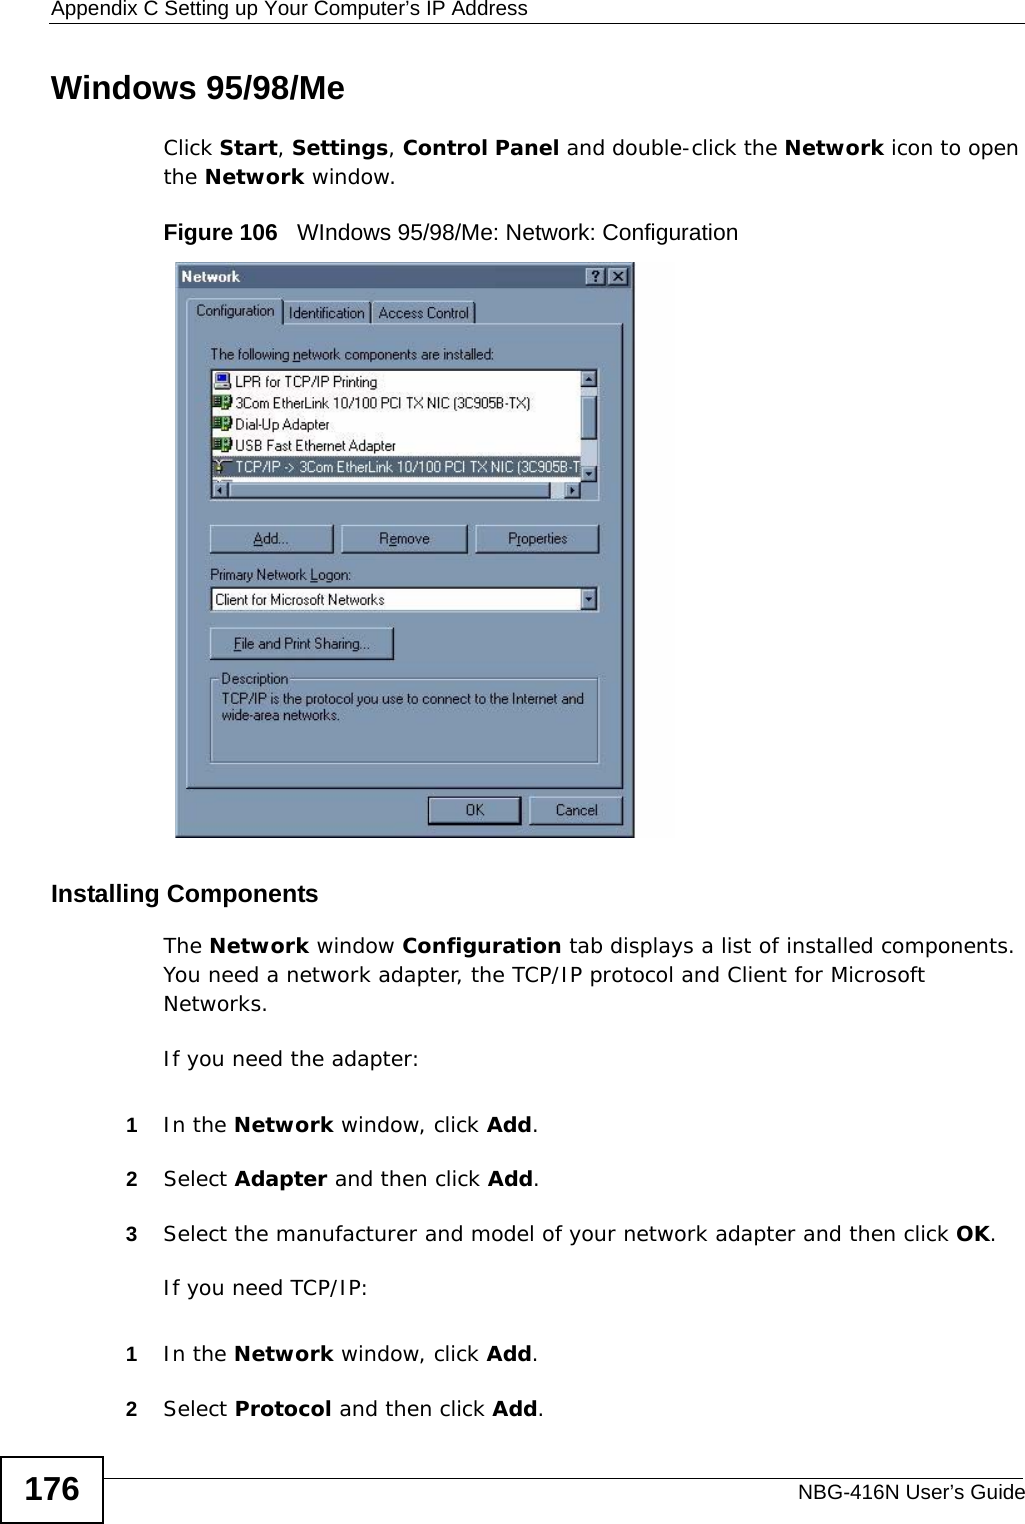 Appendix C Setting up Your Computer’s IP AddressNBG-416N User’s Guide176Windows 95/98/MeClick Start, Settings, Control Panel and double-click the Network icon to open the Network window.Figure 106   WIndows 95/98/Me: Network: ConfigurationInstalling ComponentsThe Network window Configuration tab displays a list of installed components. You need a network adapter, the TCP/IP protocol and Client for Microsoft Networks.If you need the adapter:1In the Network window, click Add.2Select Adapter and then click Add.3Select the manufacturer and model of your network adapter and then click OK.If you need TCP/IP:1In the Network window, click Add.2Select Protocol and then click Add.